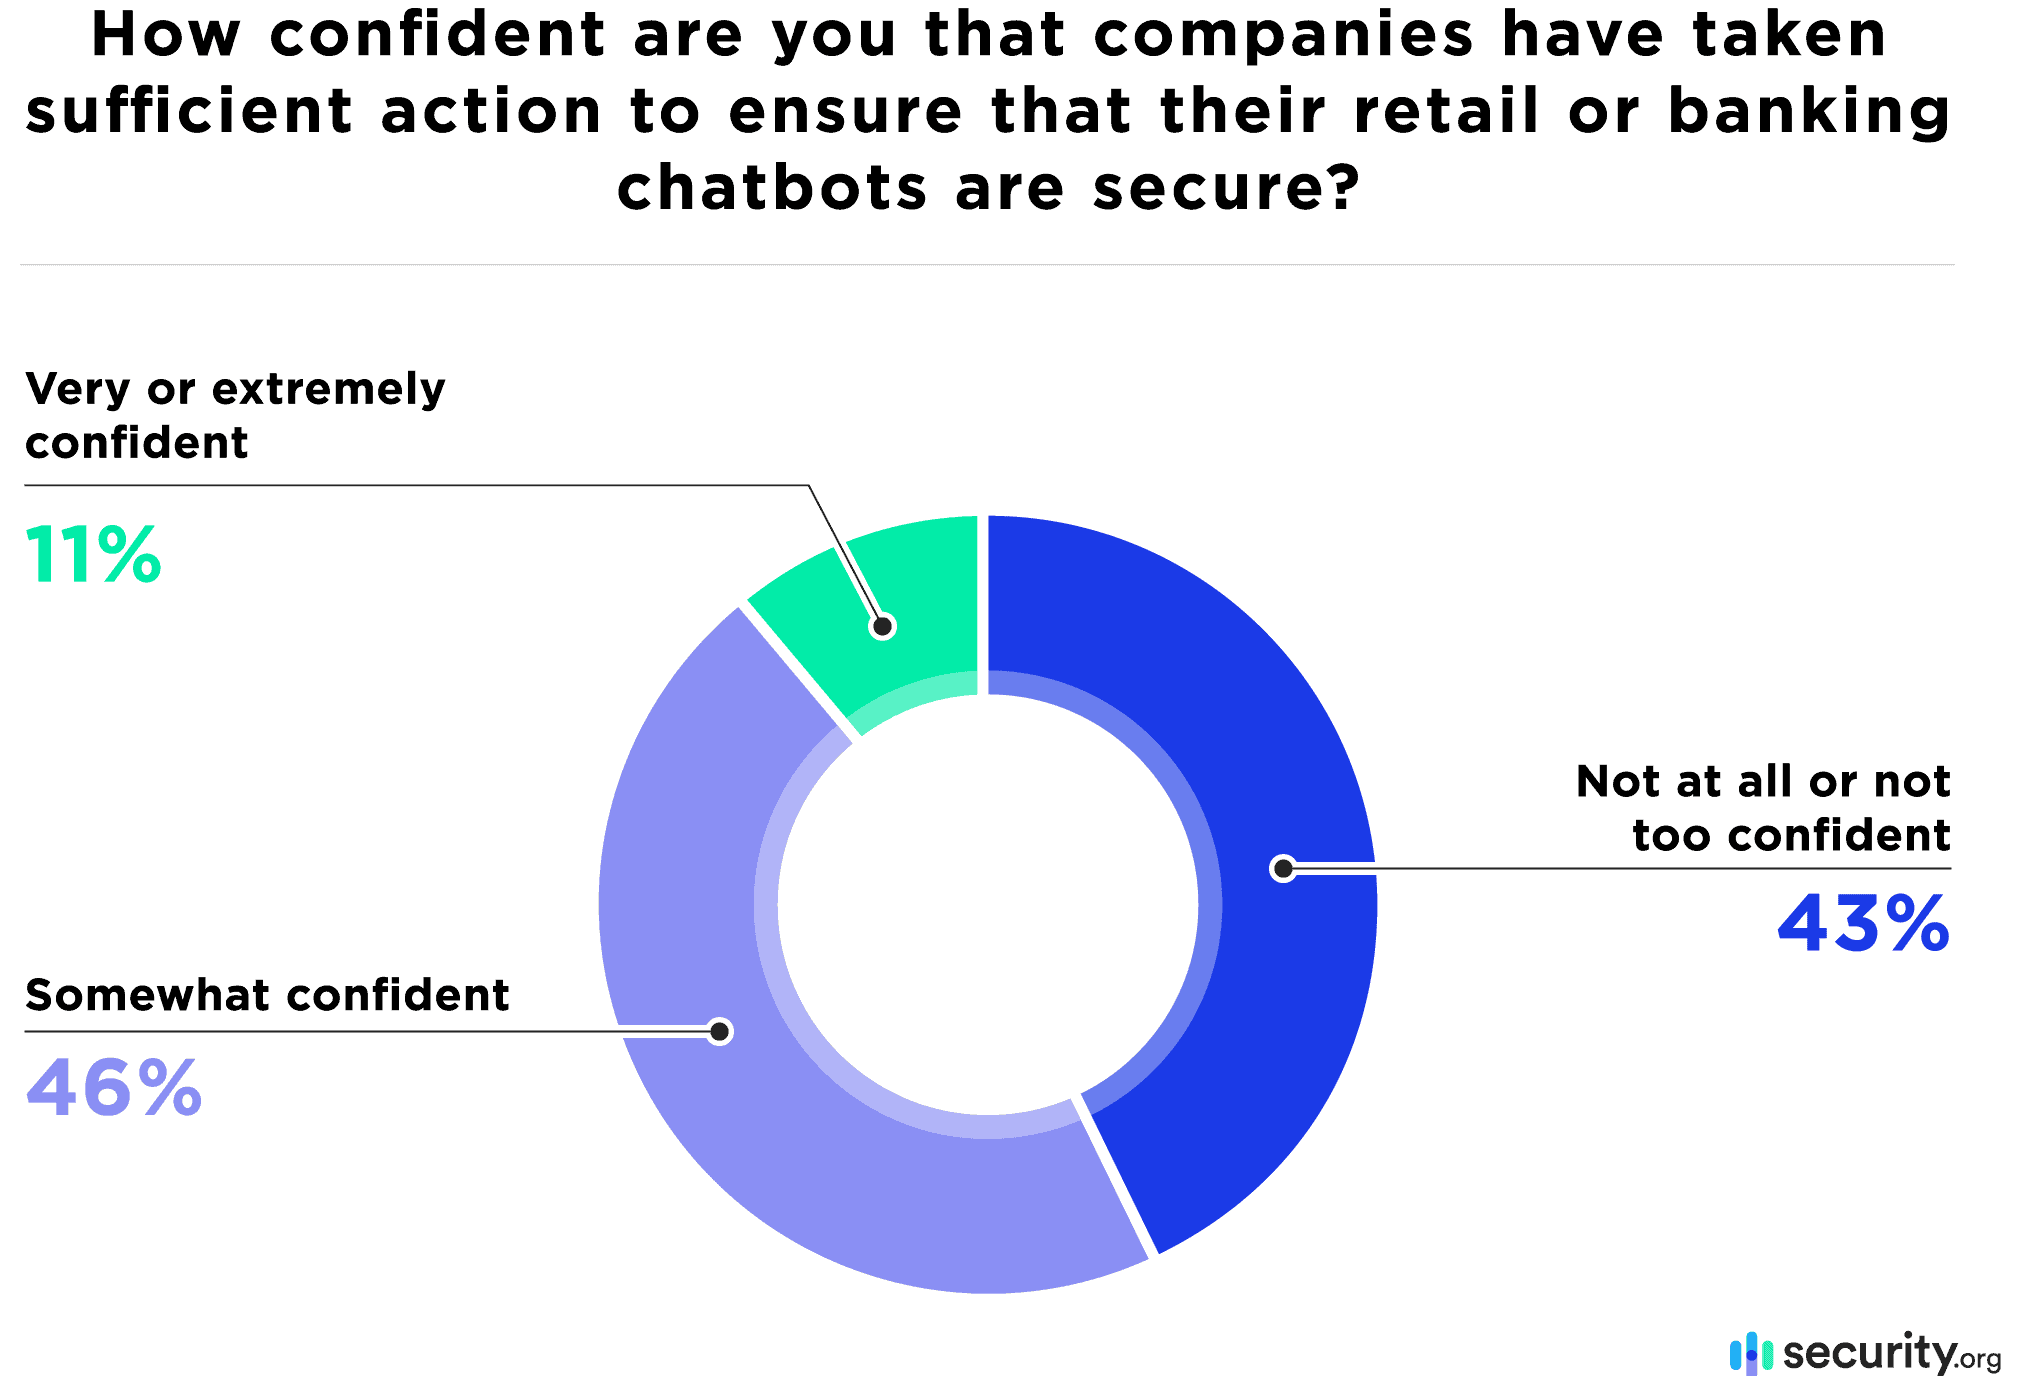 How confident are you that companies have taken sufficient action to ensure that their retail or banking chatbots are secure